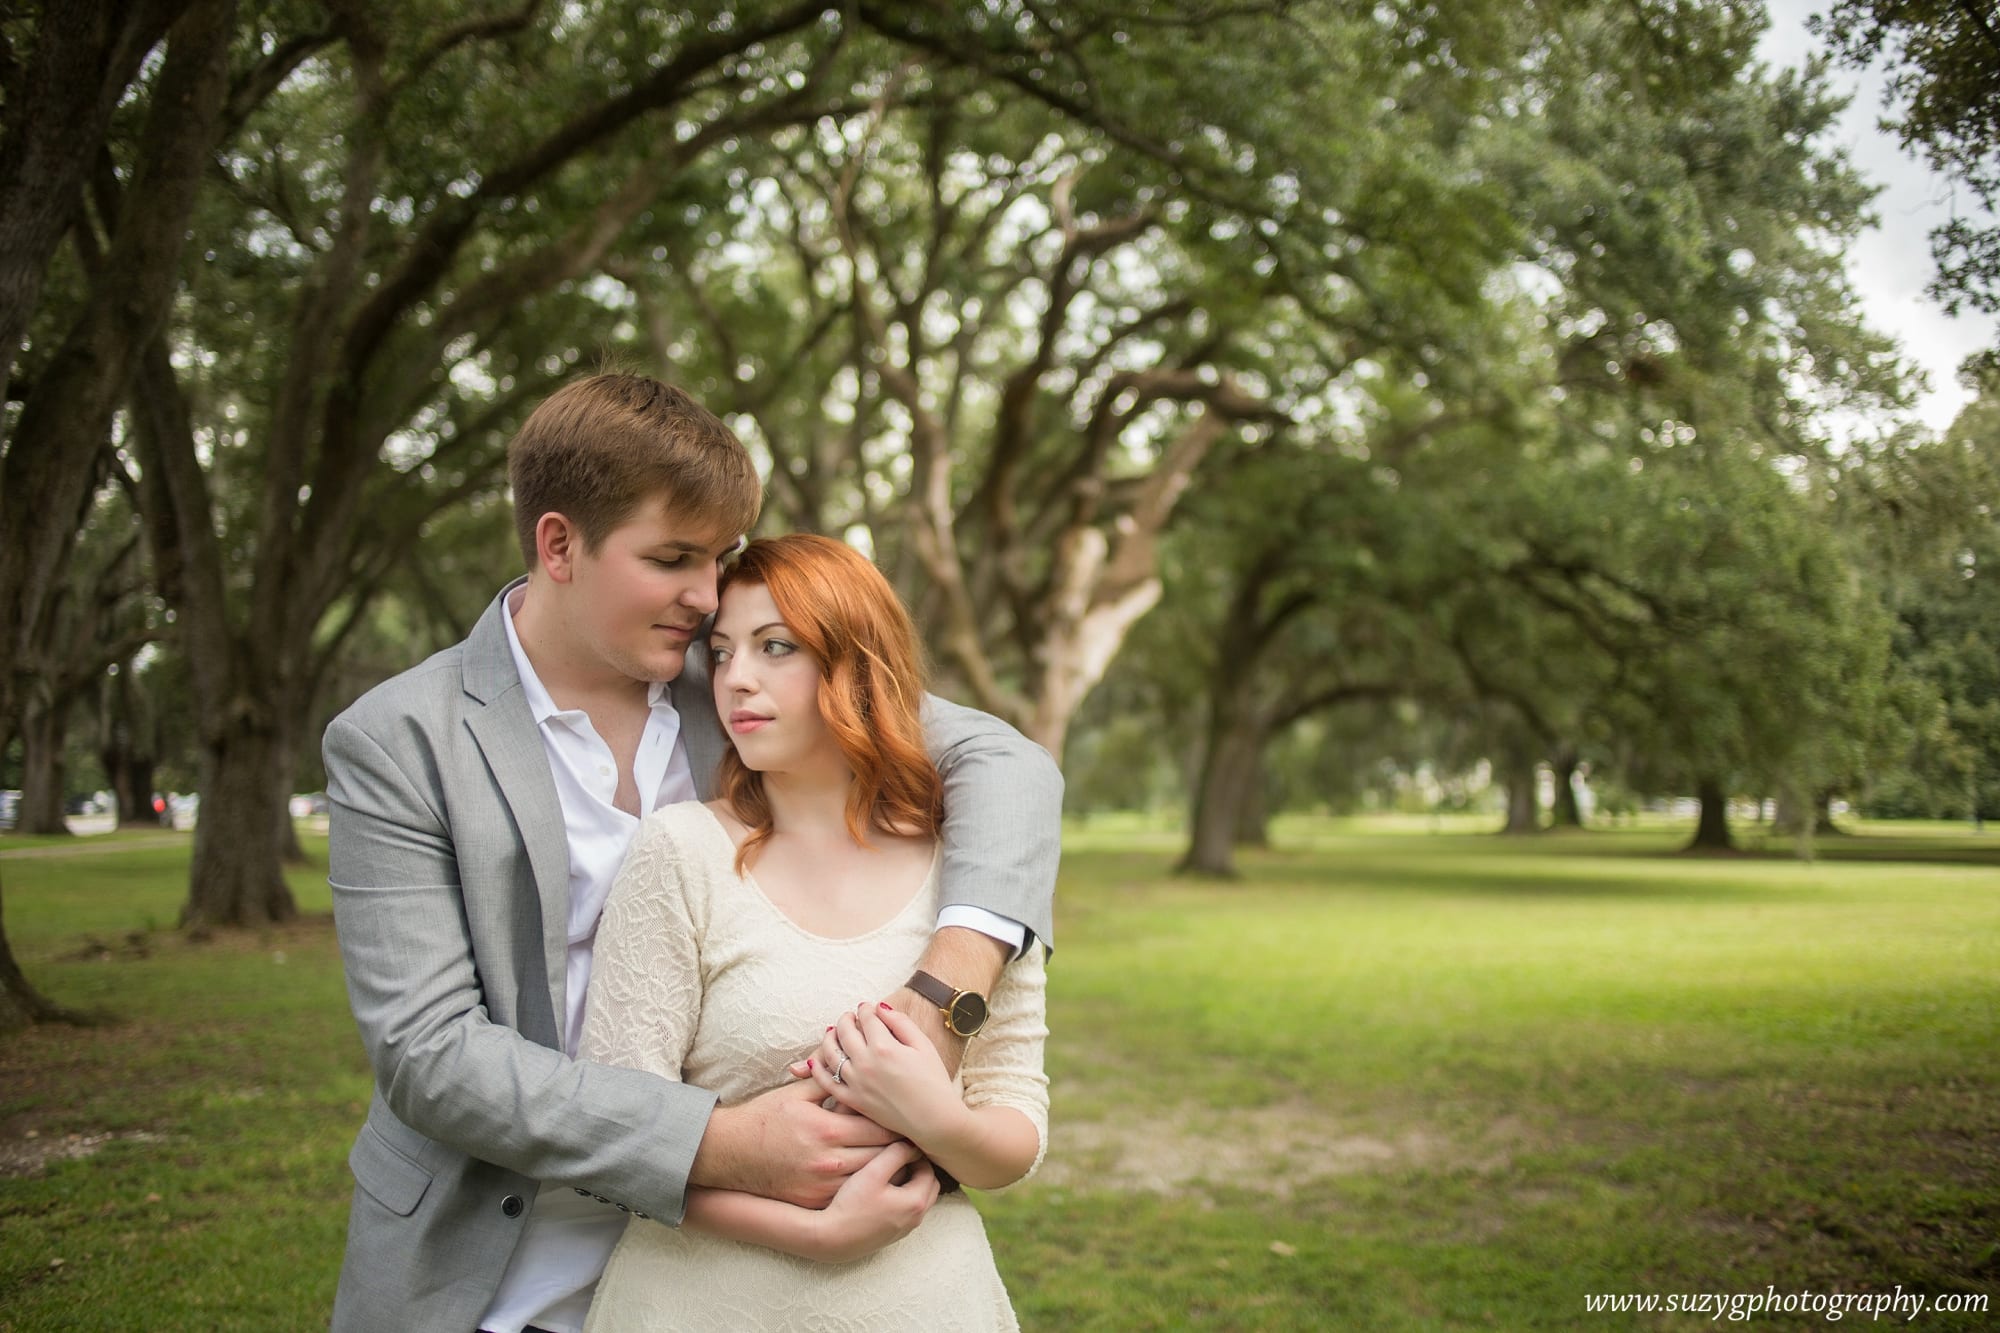 engagements-new orleans-texas-baton rouge-lake charles-suzy g-photography-suzygphotography_0129